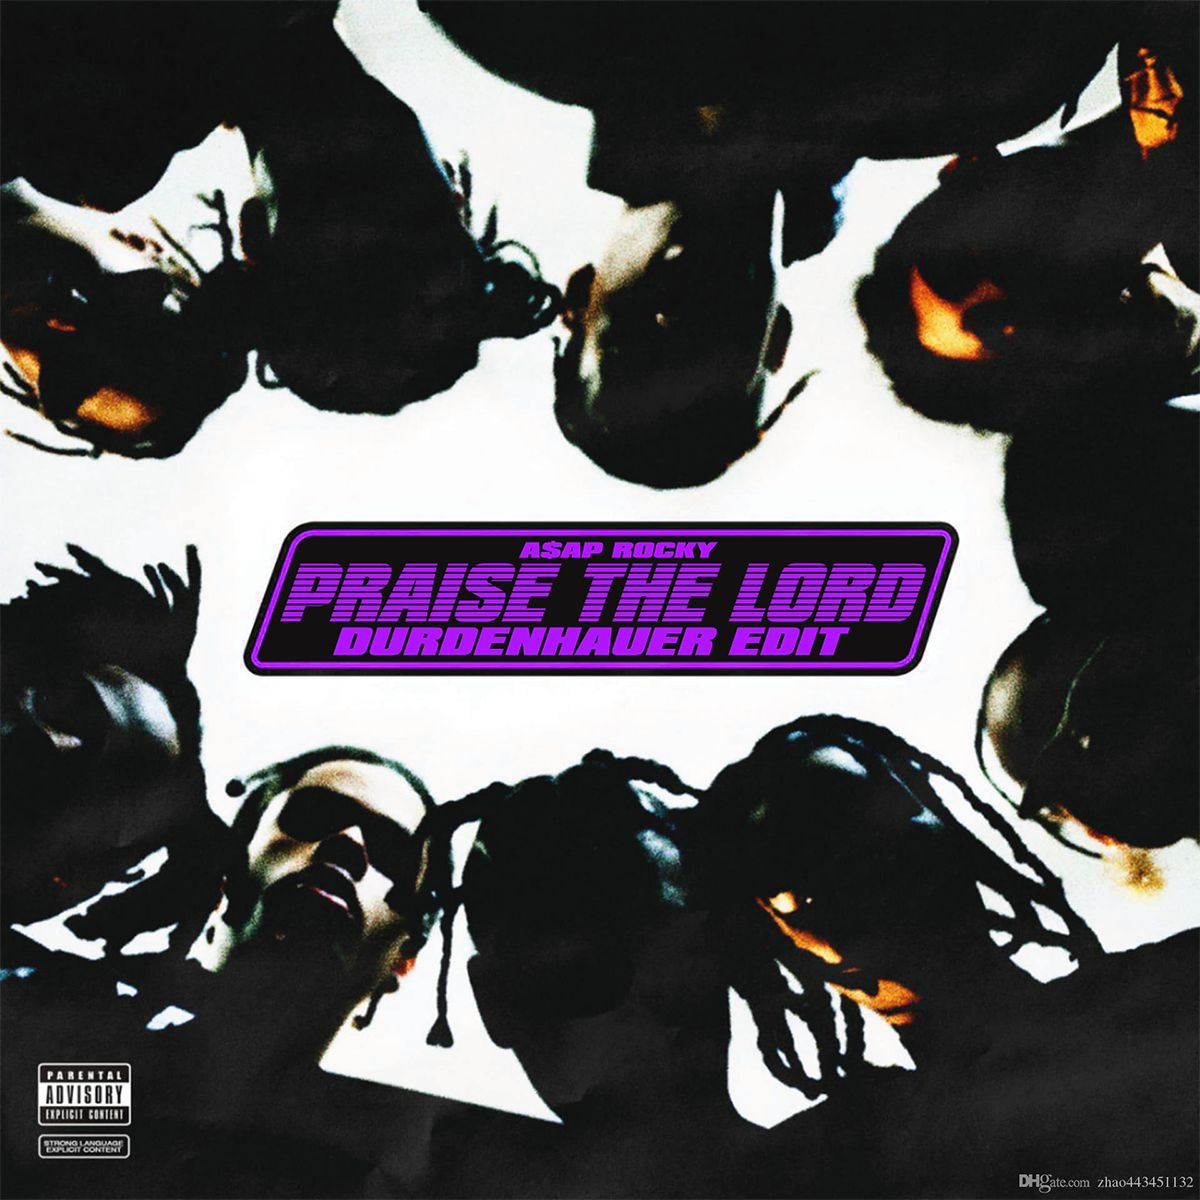 Download A$AP ROCKY - Praise the Lord (DURDENHAUER Edit) [FREE DOWNLOAD]